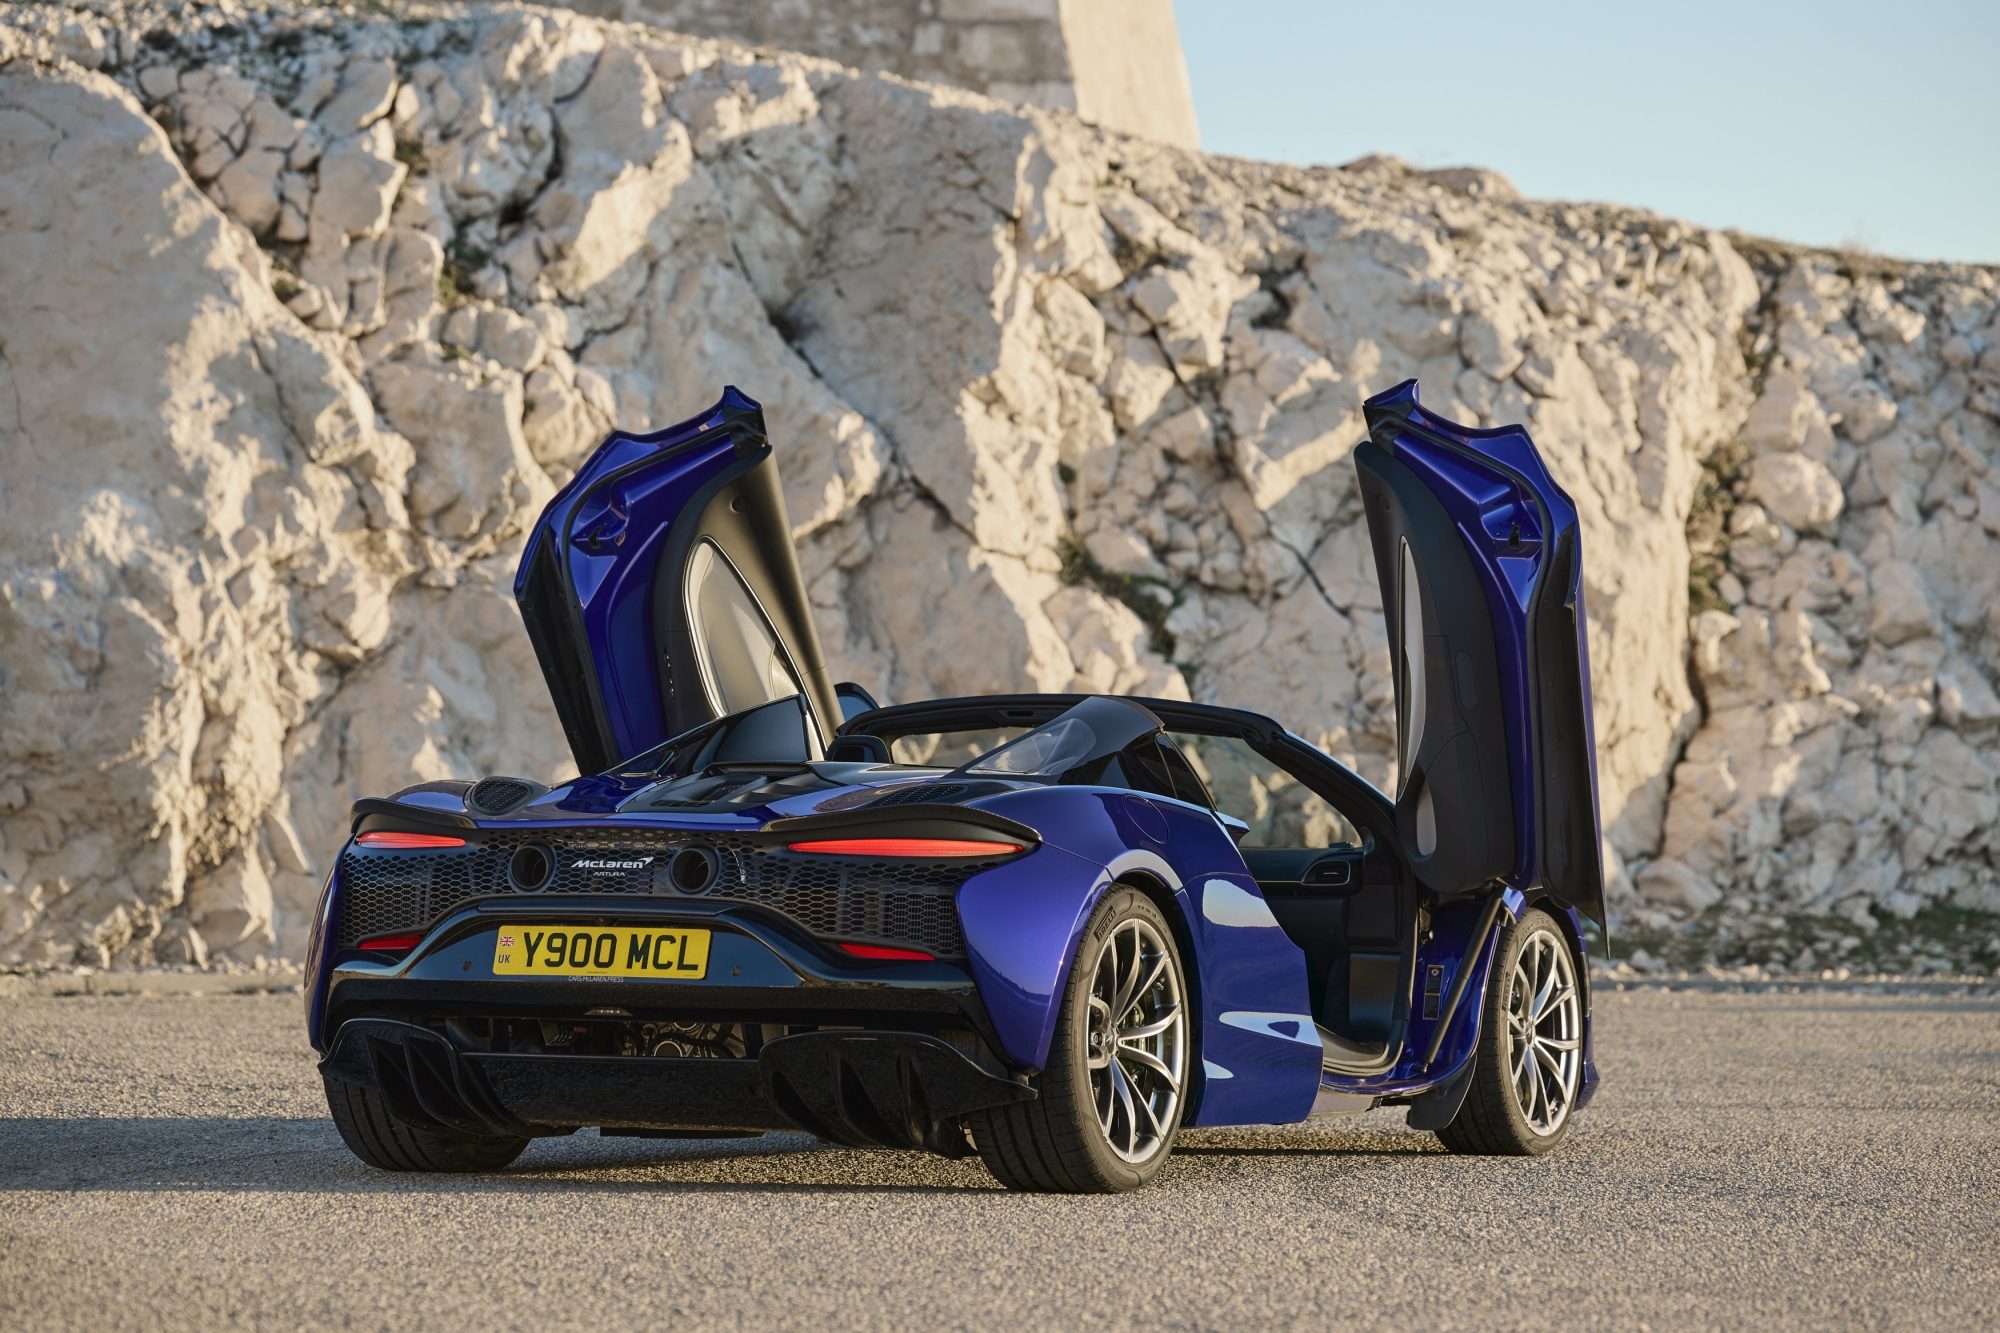 New Artura Spider revealed as McLaren’s first-ever High-Performance Hybrid convertible